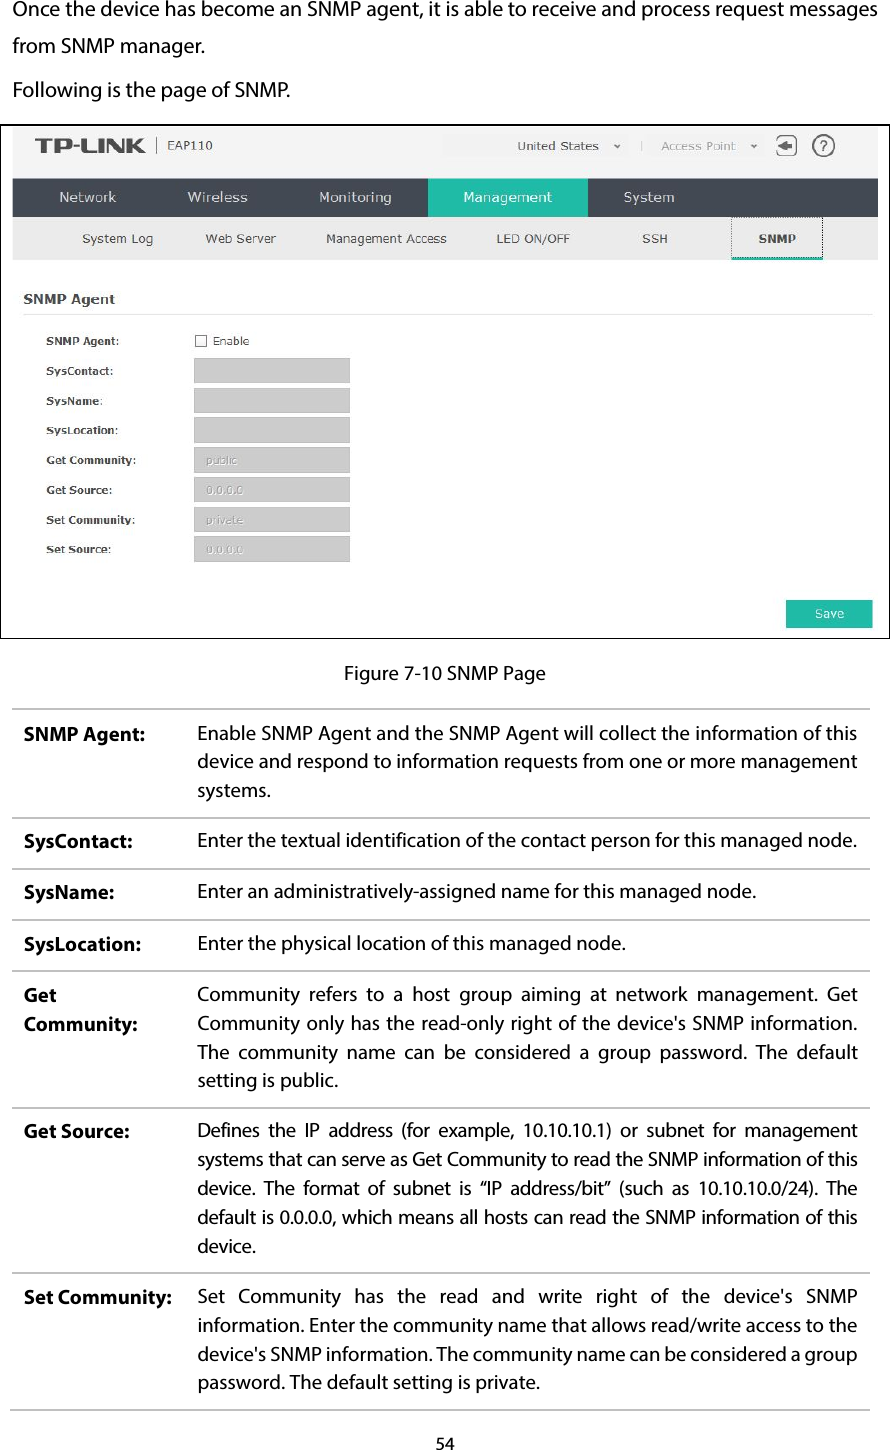 54  Once the device has become an SNMP agent, it is able to receive and process request messages from SNMP manager. Following is the page of SNMP.  Figure 7-10 SNMP Page SNMP Agent:  Enable SNMP Agent and the SNMP Agent will collect the information of this device and respond to information requests from one or more management systems. SysContact:  Enter the textual identification of the contact person for this managed node. SysName:  Enter an administratively-assigned name for this managed node. SysLocation:  Enter the physical location of this managed node. Get Community: Community refers to a host group aiming at  network management.  Get Community only has the read-only right of the device&apos;s SNMP information. The community name can be considered a group password. The default setting is public. Get Source:  Defines the IP address (for example, 10.10.10.1) or subnet  for management systems that can serve as Get Community to read the SNMP information of this device.  The format of subnet is “IP address/bit”  (such as 10.10.10.0/24). The default is 0.0.0.0, which means all hosts can read the SNMP information of this device. Set Community:  Set Community has the read and write right of the  device&apos;s SNMP information. Enter the community name that allows read/write access to the device&apos;s SNMP information. The community name can be considered a group password. The default setting is private. 